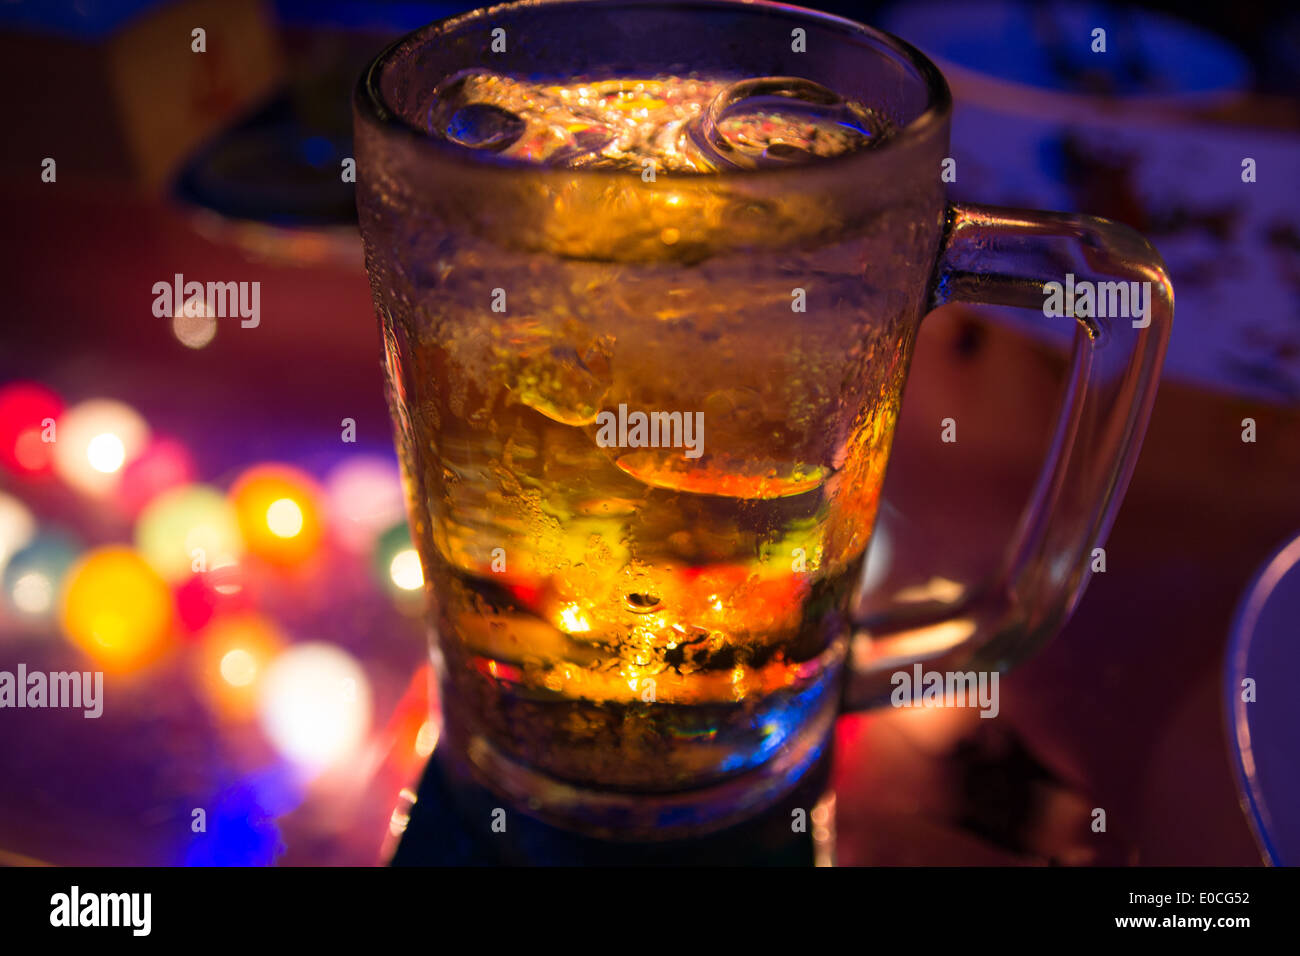 Glass of beer with night scene Stock Photo